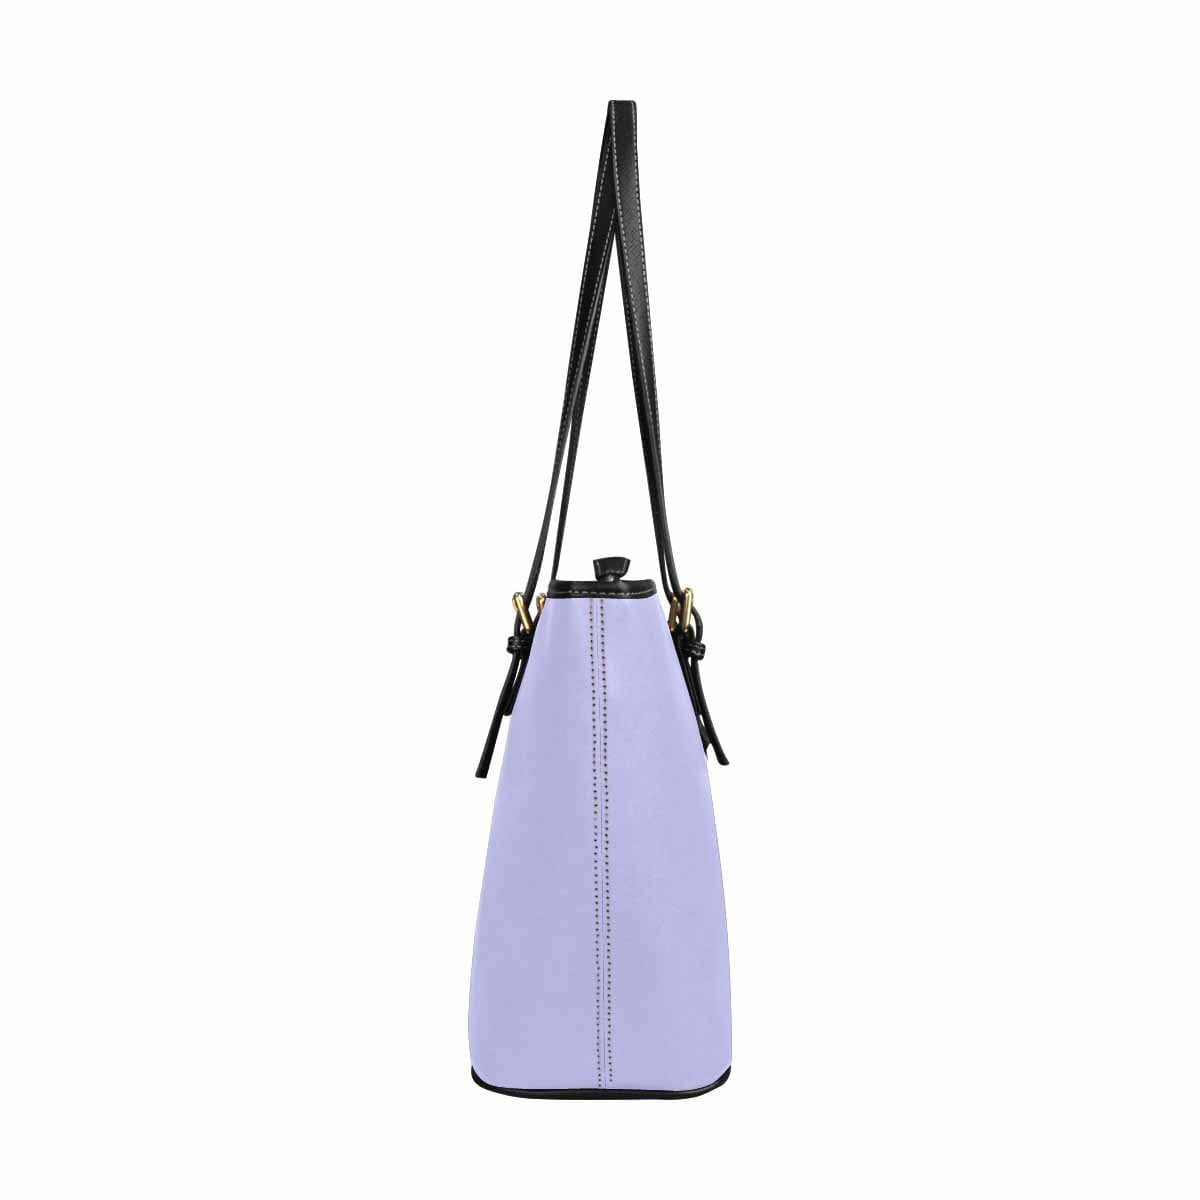 Large Leather Tote Shoulder Bag - Periwinkle Purple - Bags | Leather Tote Bags